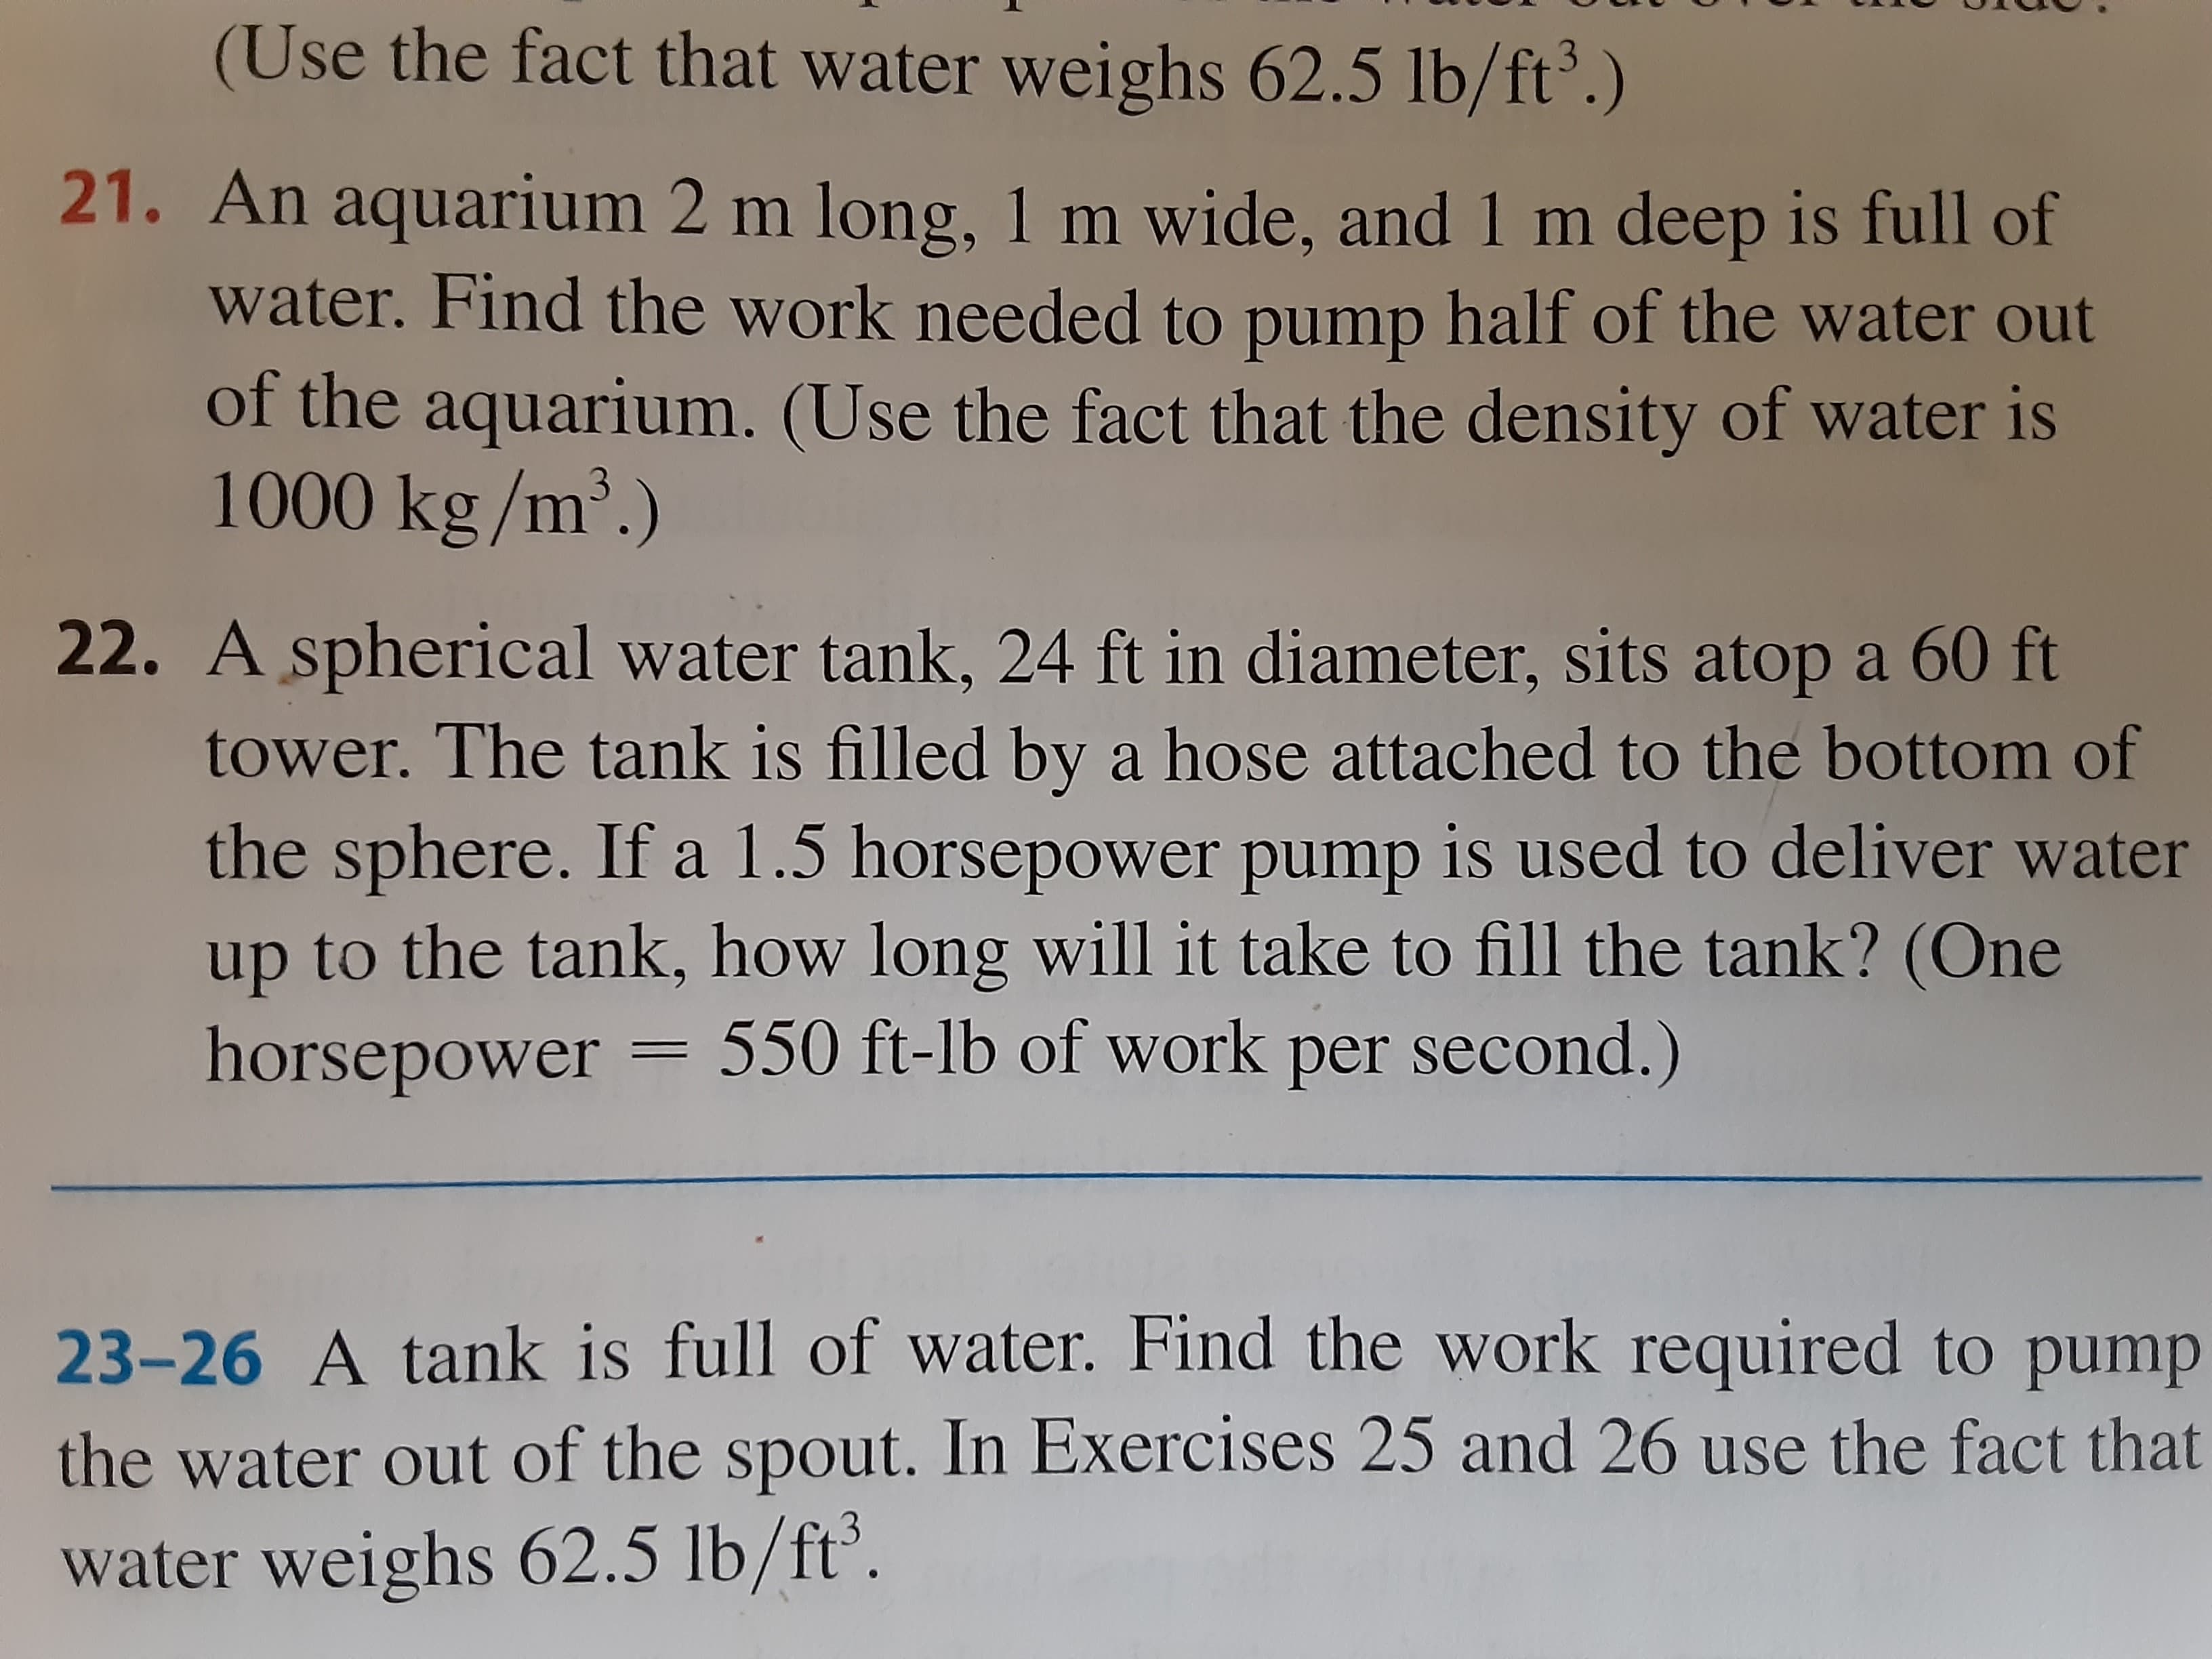 A spherical water tank, 24 ft in diameter, sits atop a 60 ft
tower. The tank is filled by a hose attached to the bottom of
the sphere. If a 1.5 horsepower pump is used to deliver water
up to the tank, how long will it take to fill the tank? (One
horsepower = 550 ft-lb of work per second.)
